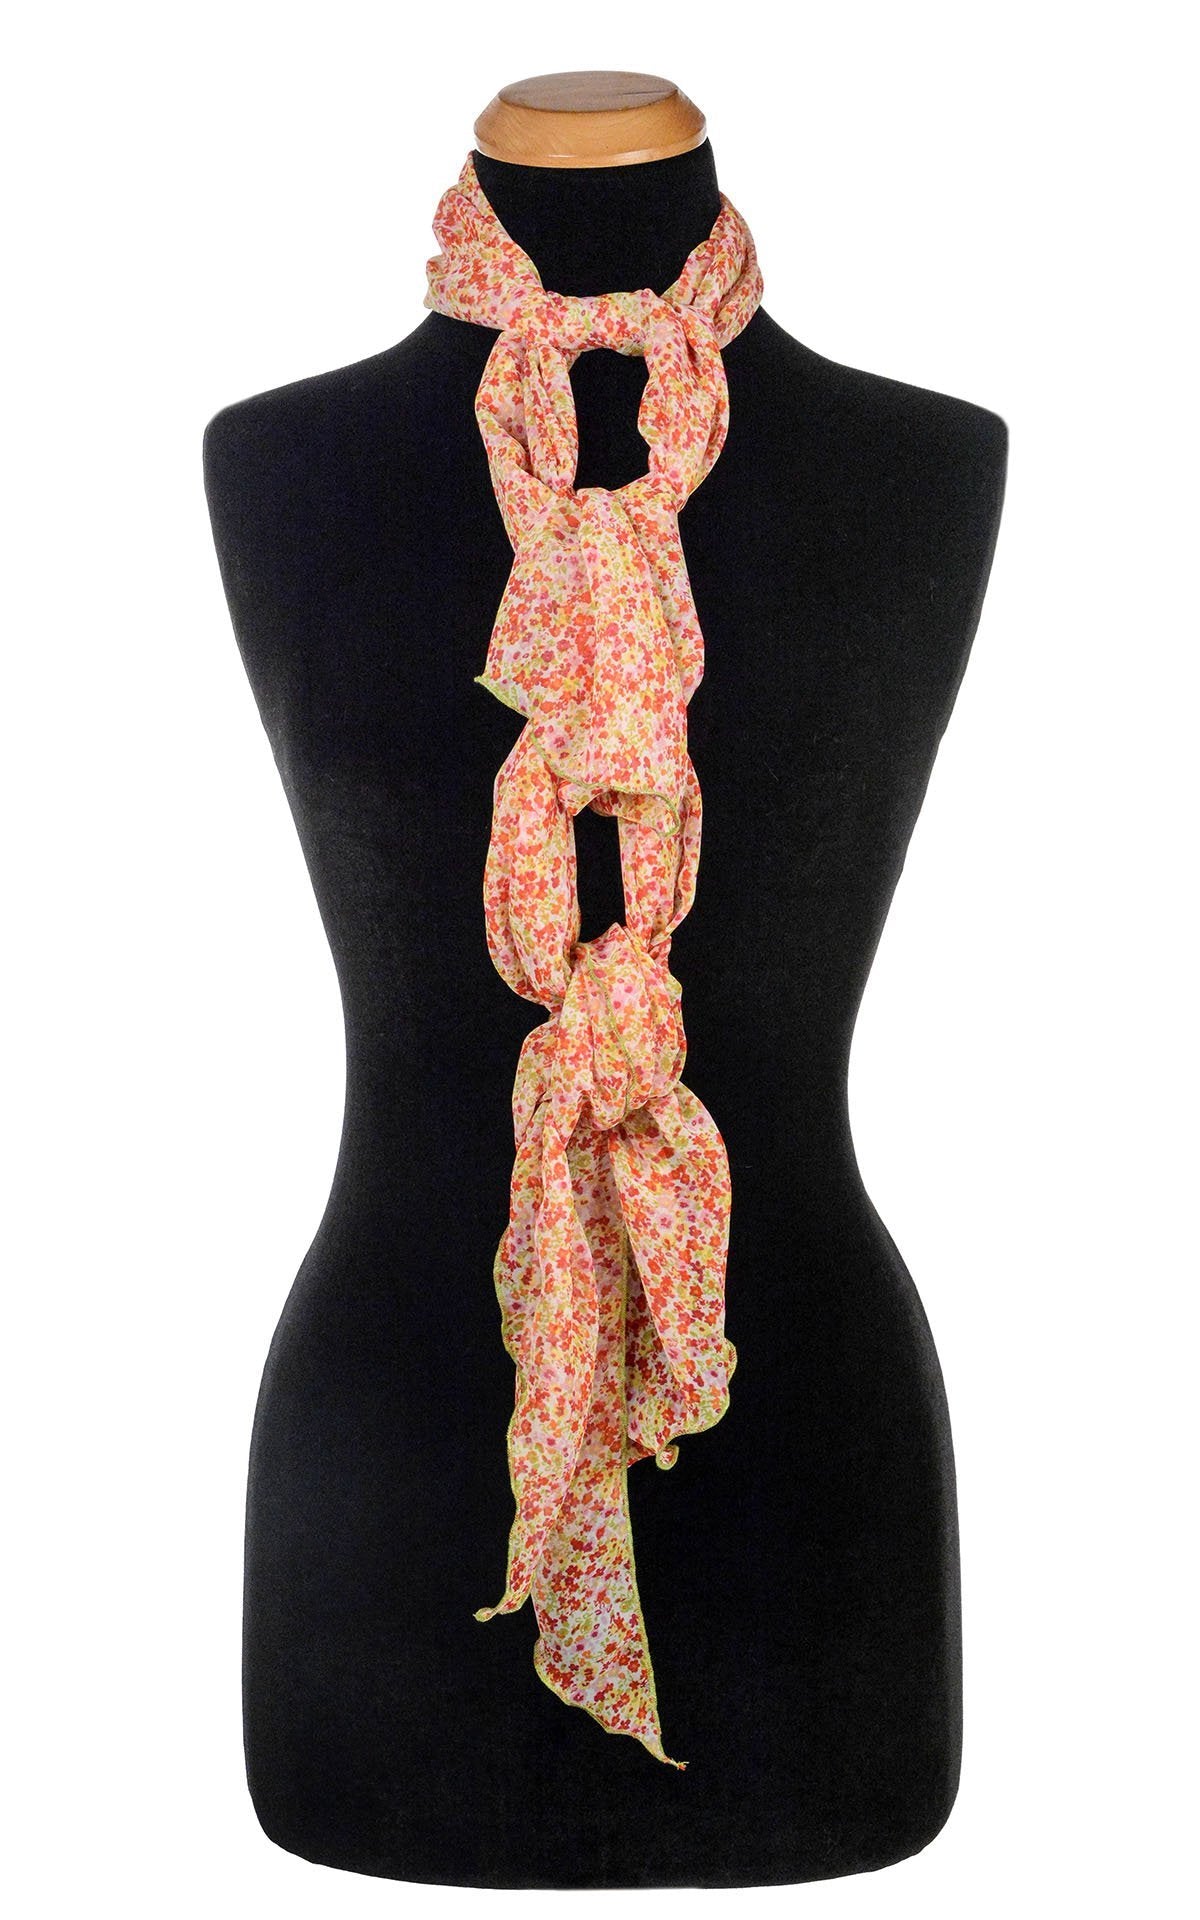 Women’s Large Handkerchief Scarf, Wrap on Mannequin | Summer Daze floral Chiffon, lime green, red, yellow, and cream| Handmade in Seattle WA | Pandemonium Millinery